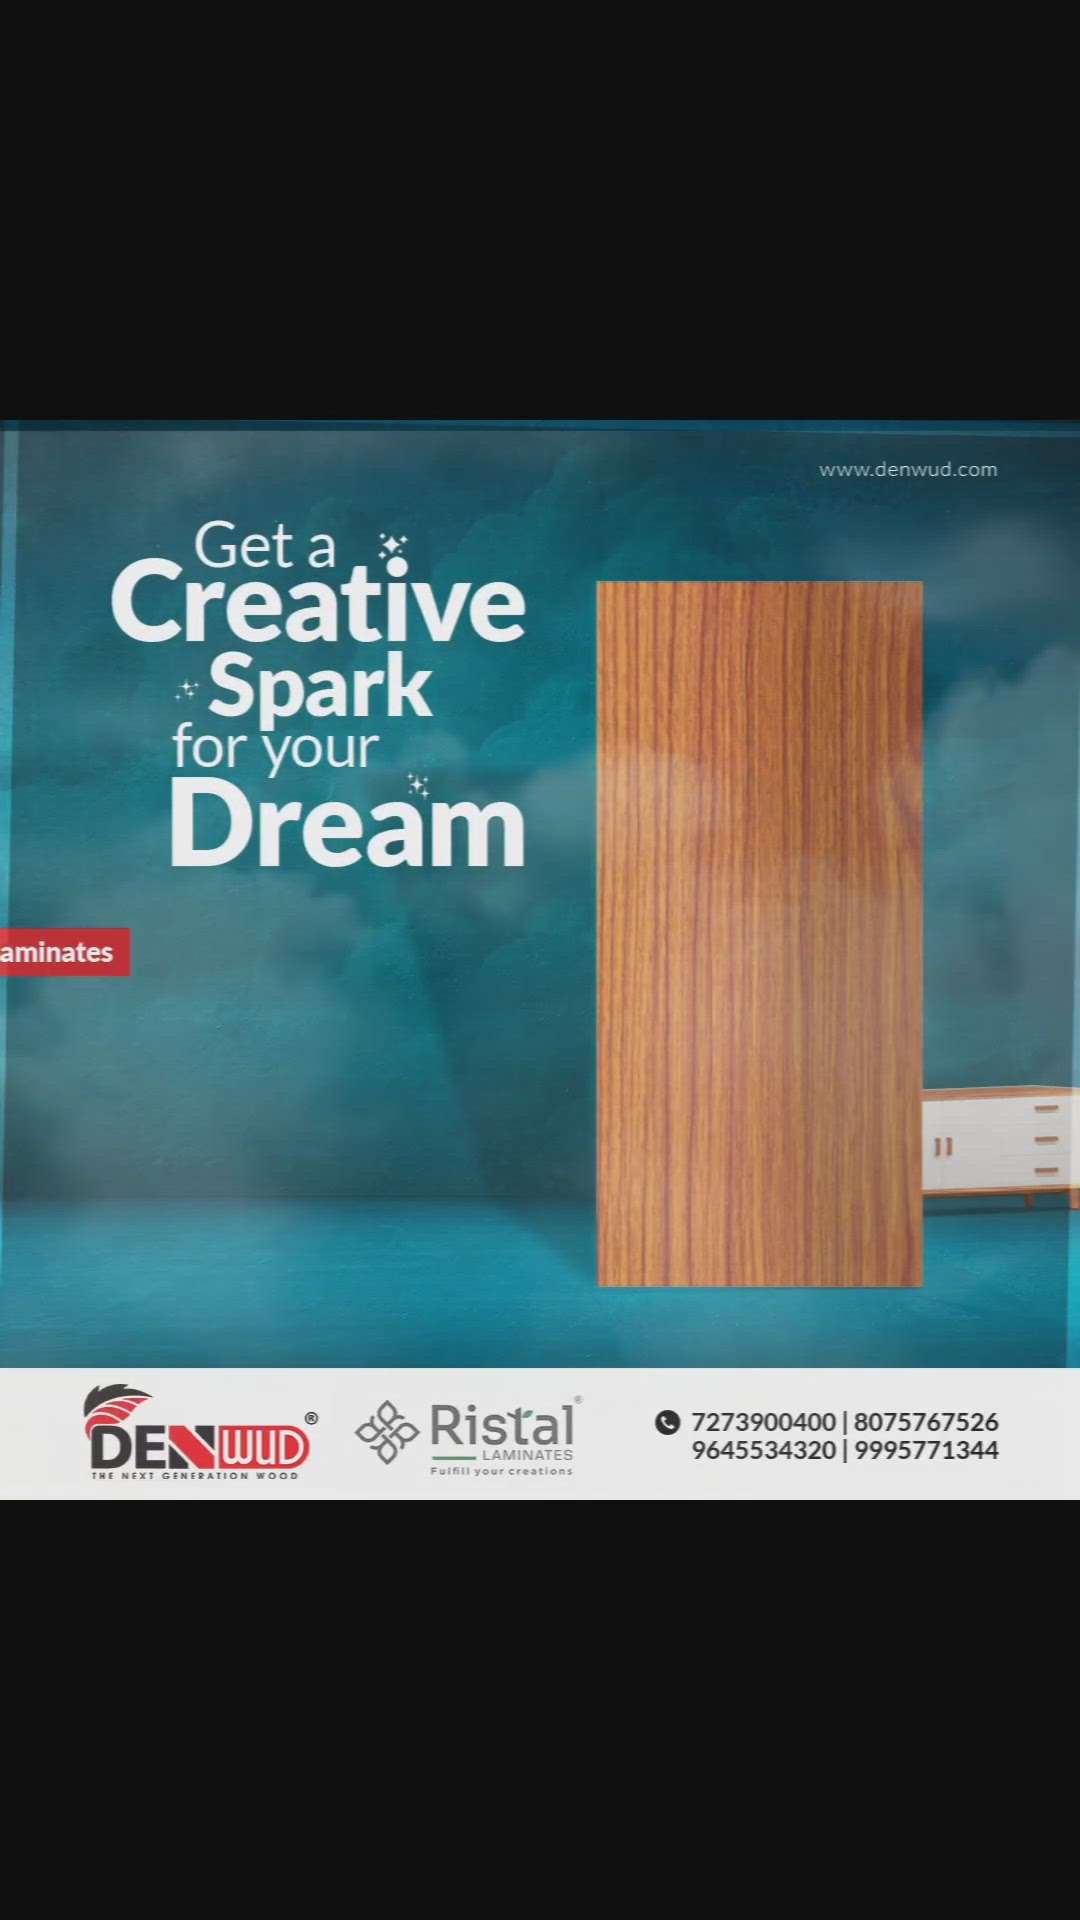 Color your world and home with Denwud Decorative Laminates! Explore collection of decorative laminates featuring super gloss finishes and vibrant colors. Your dream space awaits. Denwud Decorative Laminates

www.denwud.com

#denwud #denwood #nextgenerationwood #termiteproof #homedecor #applications #homeinterior #homeproducts #NaturalWoodVeneer #waterproof